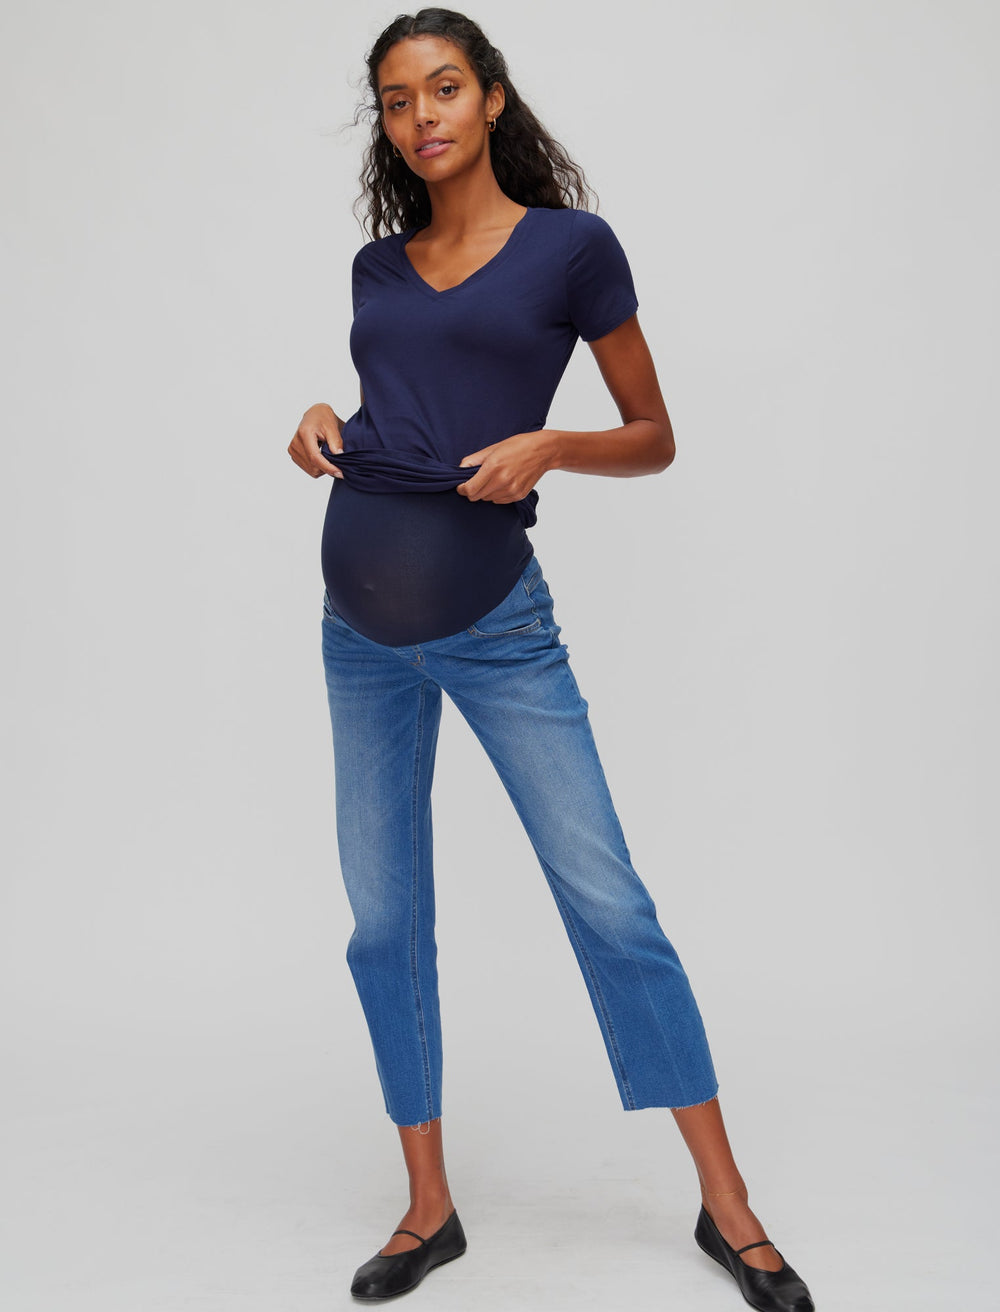 Your Quick Guide Picking The Perfect Fit Maternity Pants - Motherhood  Closet - Maternity Consignment